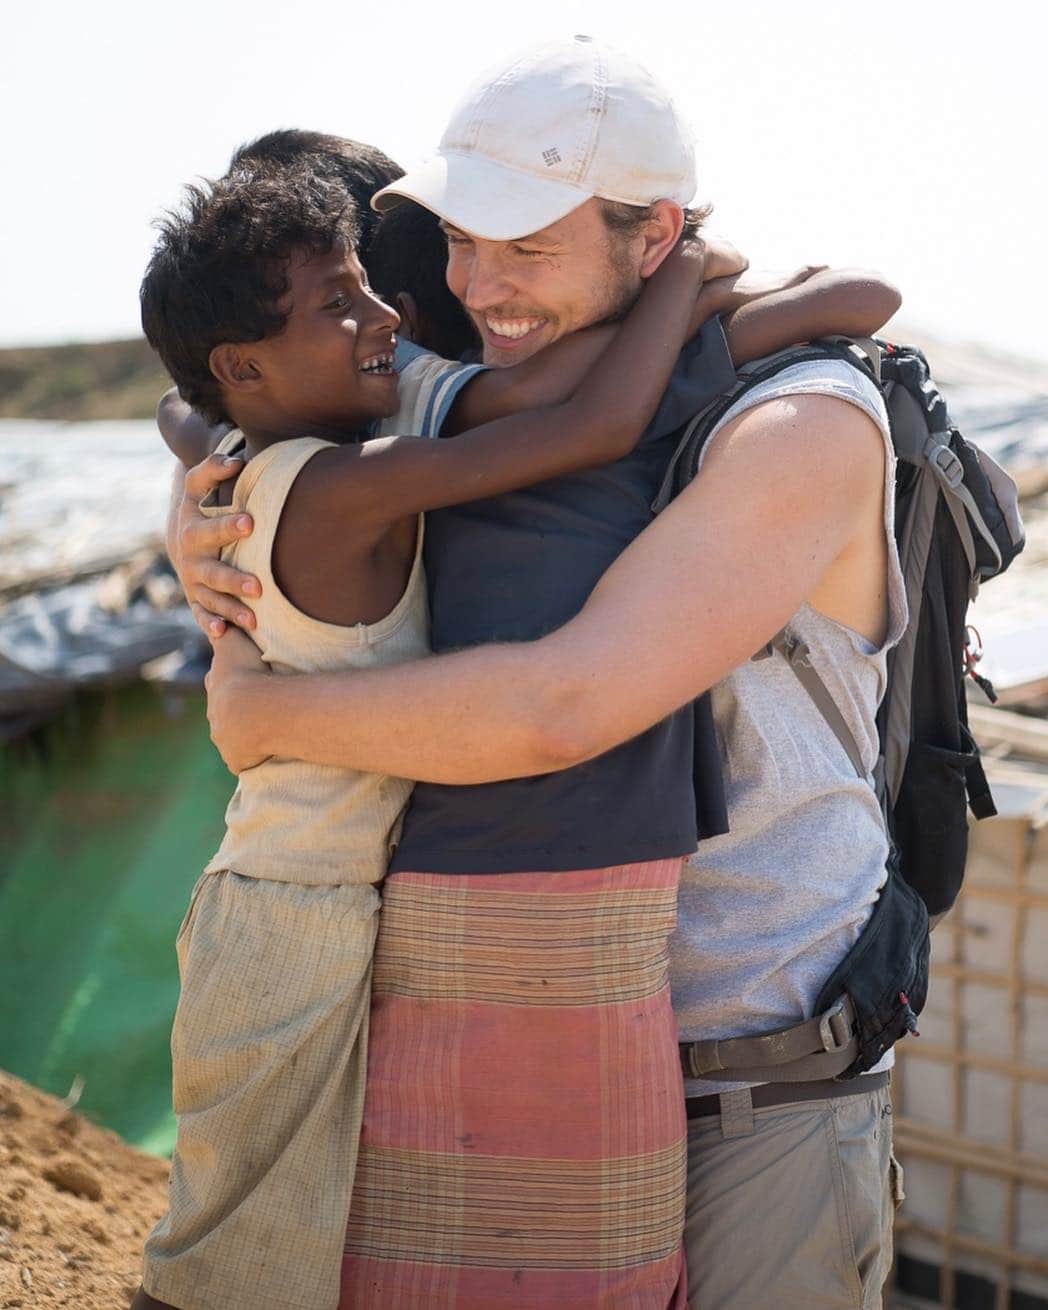 ジェローム・ジャールのインスタグラム：「Hello Instagram. It’s been exactly 11 months. Longer than it takes to create a baby. I spent most of those months in Bangladesh with the Rohingya refugees of Myanmar. I haven’t even had a chance to tell you about this mission but last November together with many of you we raised over 2 million $ for the refugees. I have been making sure every dollar was properly spent. In my next post I will be showing you what was accomplished. It’s good to be able to breath for a moment and send you this message. I miss communicating with all of you tremendously. I want to restore the relationship that I feel like I have had with you. And I want to make it more real than ever. Just raw energy shared through words and photos and videos. No space for BS. Both you and me don’t have time for anything else. I chose this photo because there is at least 3 people in my arms haha so that’s a little bit how it would look If I would have to hug all of you. Until we can do that on instagram it will just be words and pixels. But real powerful love energy behind it. Right now feels a little bit like calling an old friend after 11 months not speaking. Weirdly it feels natural. I hope all of you are doing good. I hope you’ve kept chasing for more realness in your life, for more freedom, for more expansion of yourself. I sure did. It may sound like the same me you knew but a lot has changed. I have had to let go of a lot of past trauma to finally touch freedom. I am getting there. I wish it for everyone. Maybe one day I will speak about it. In the meantime this is just a hi, just a bonjour, a Salam, and lots of respect and UNCONDITIONAL LOVE for all of you that have decided to follow me one day. Let’s do something meaningful with this interesting virtual bridge between all of us. I won’t be entertaining you. I won’t be distracting you from your life. I am here for the real stuff. The real deal. For those that are on board I will see you soon. J」